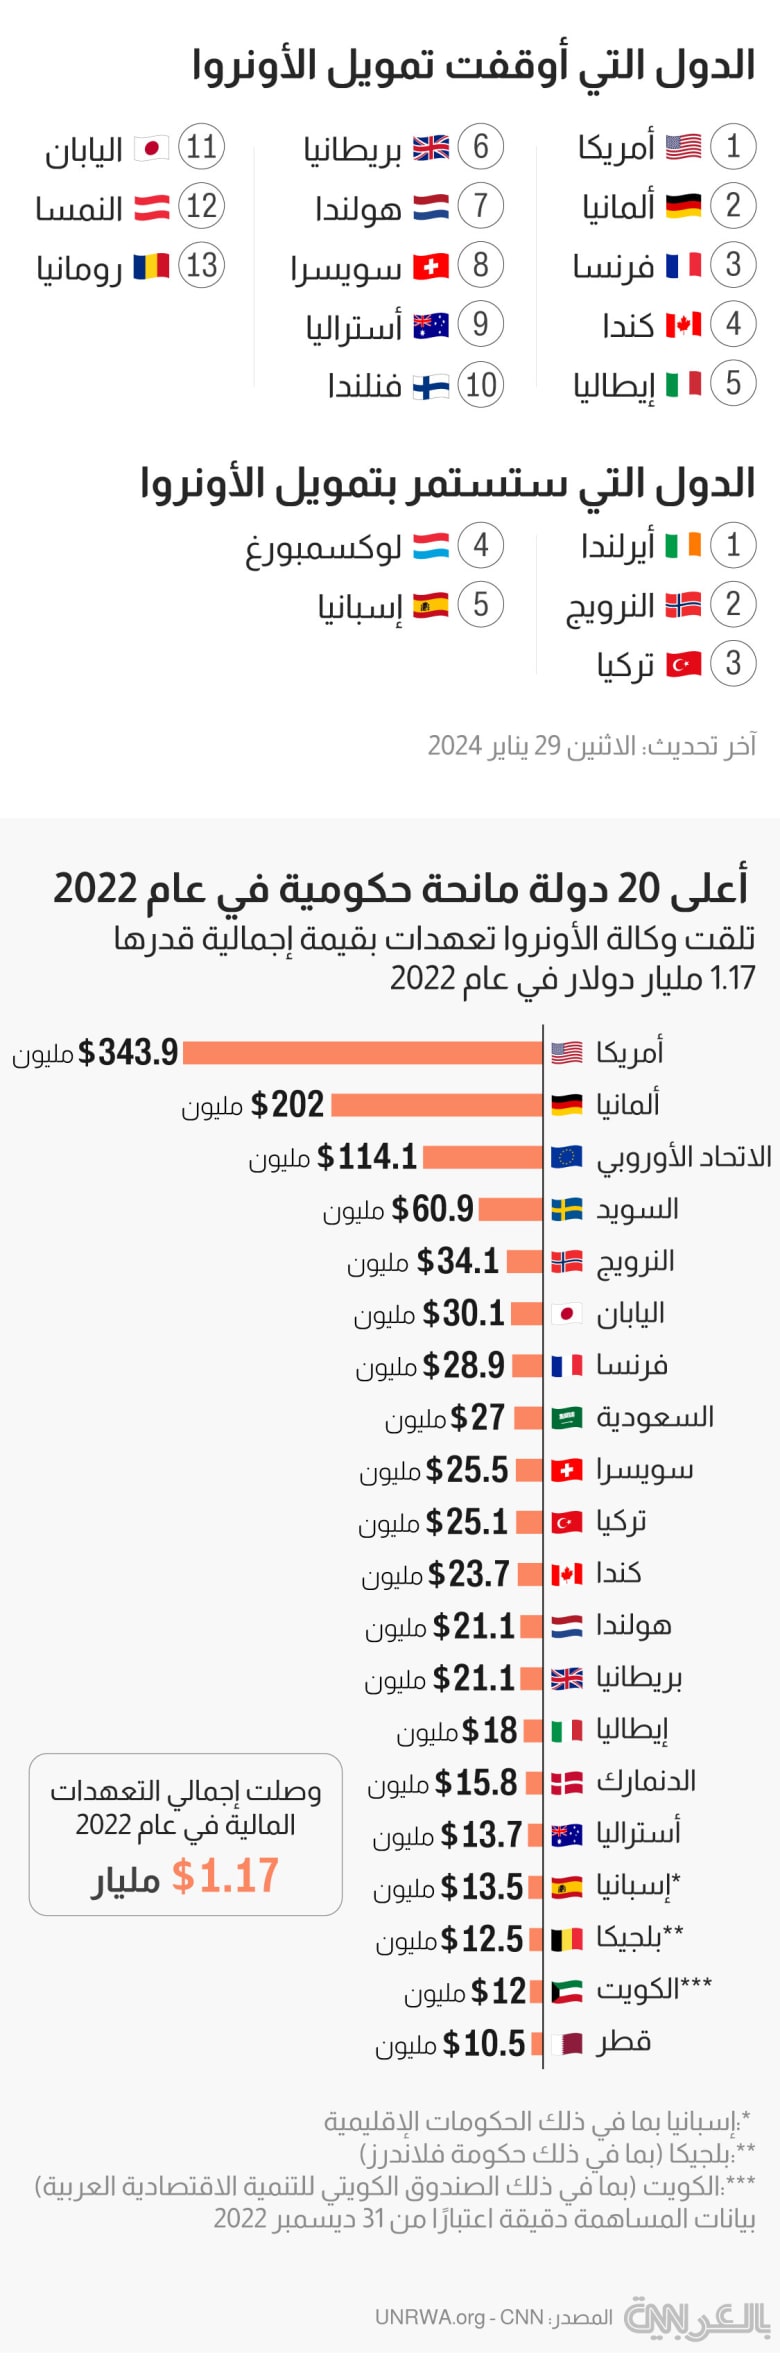 unrwa-facts-donors-2022